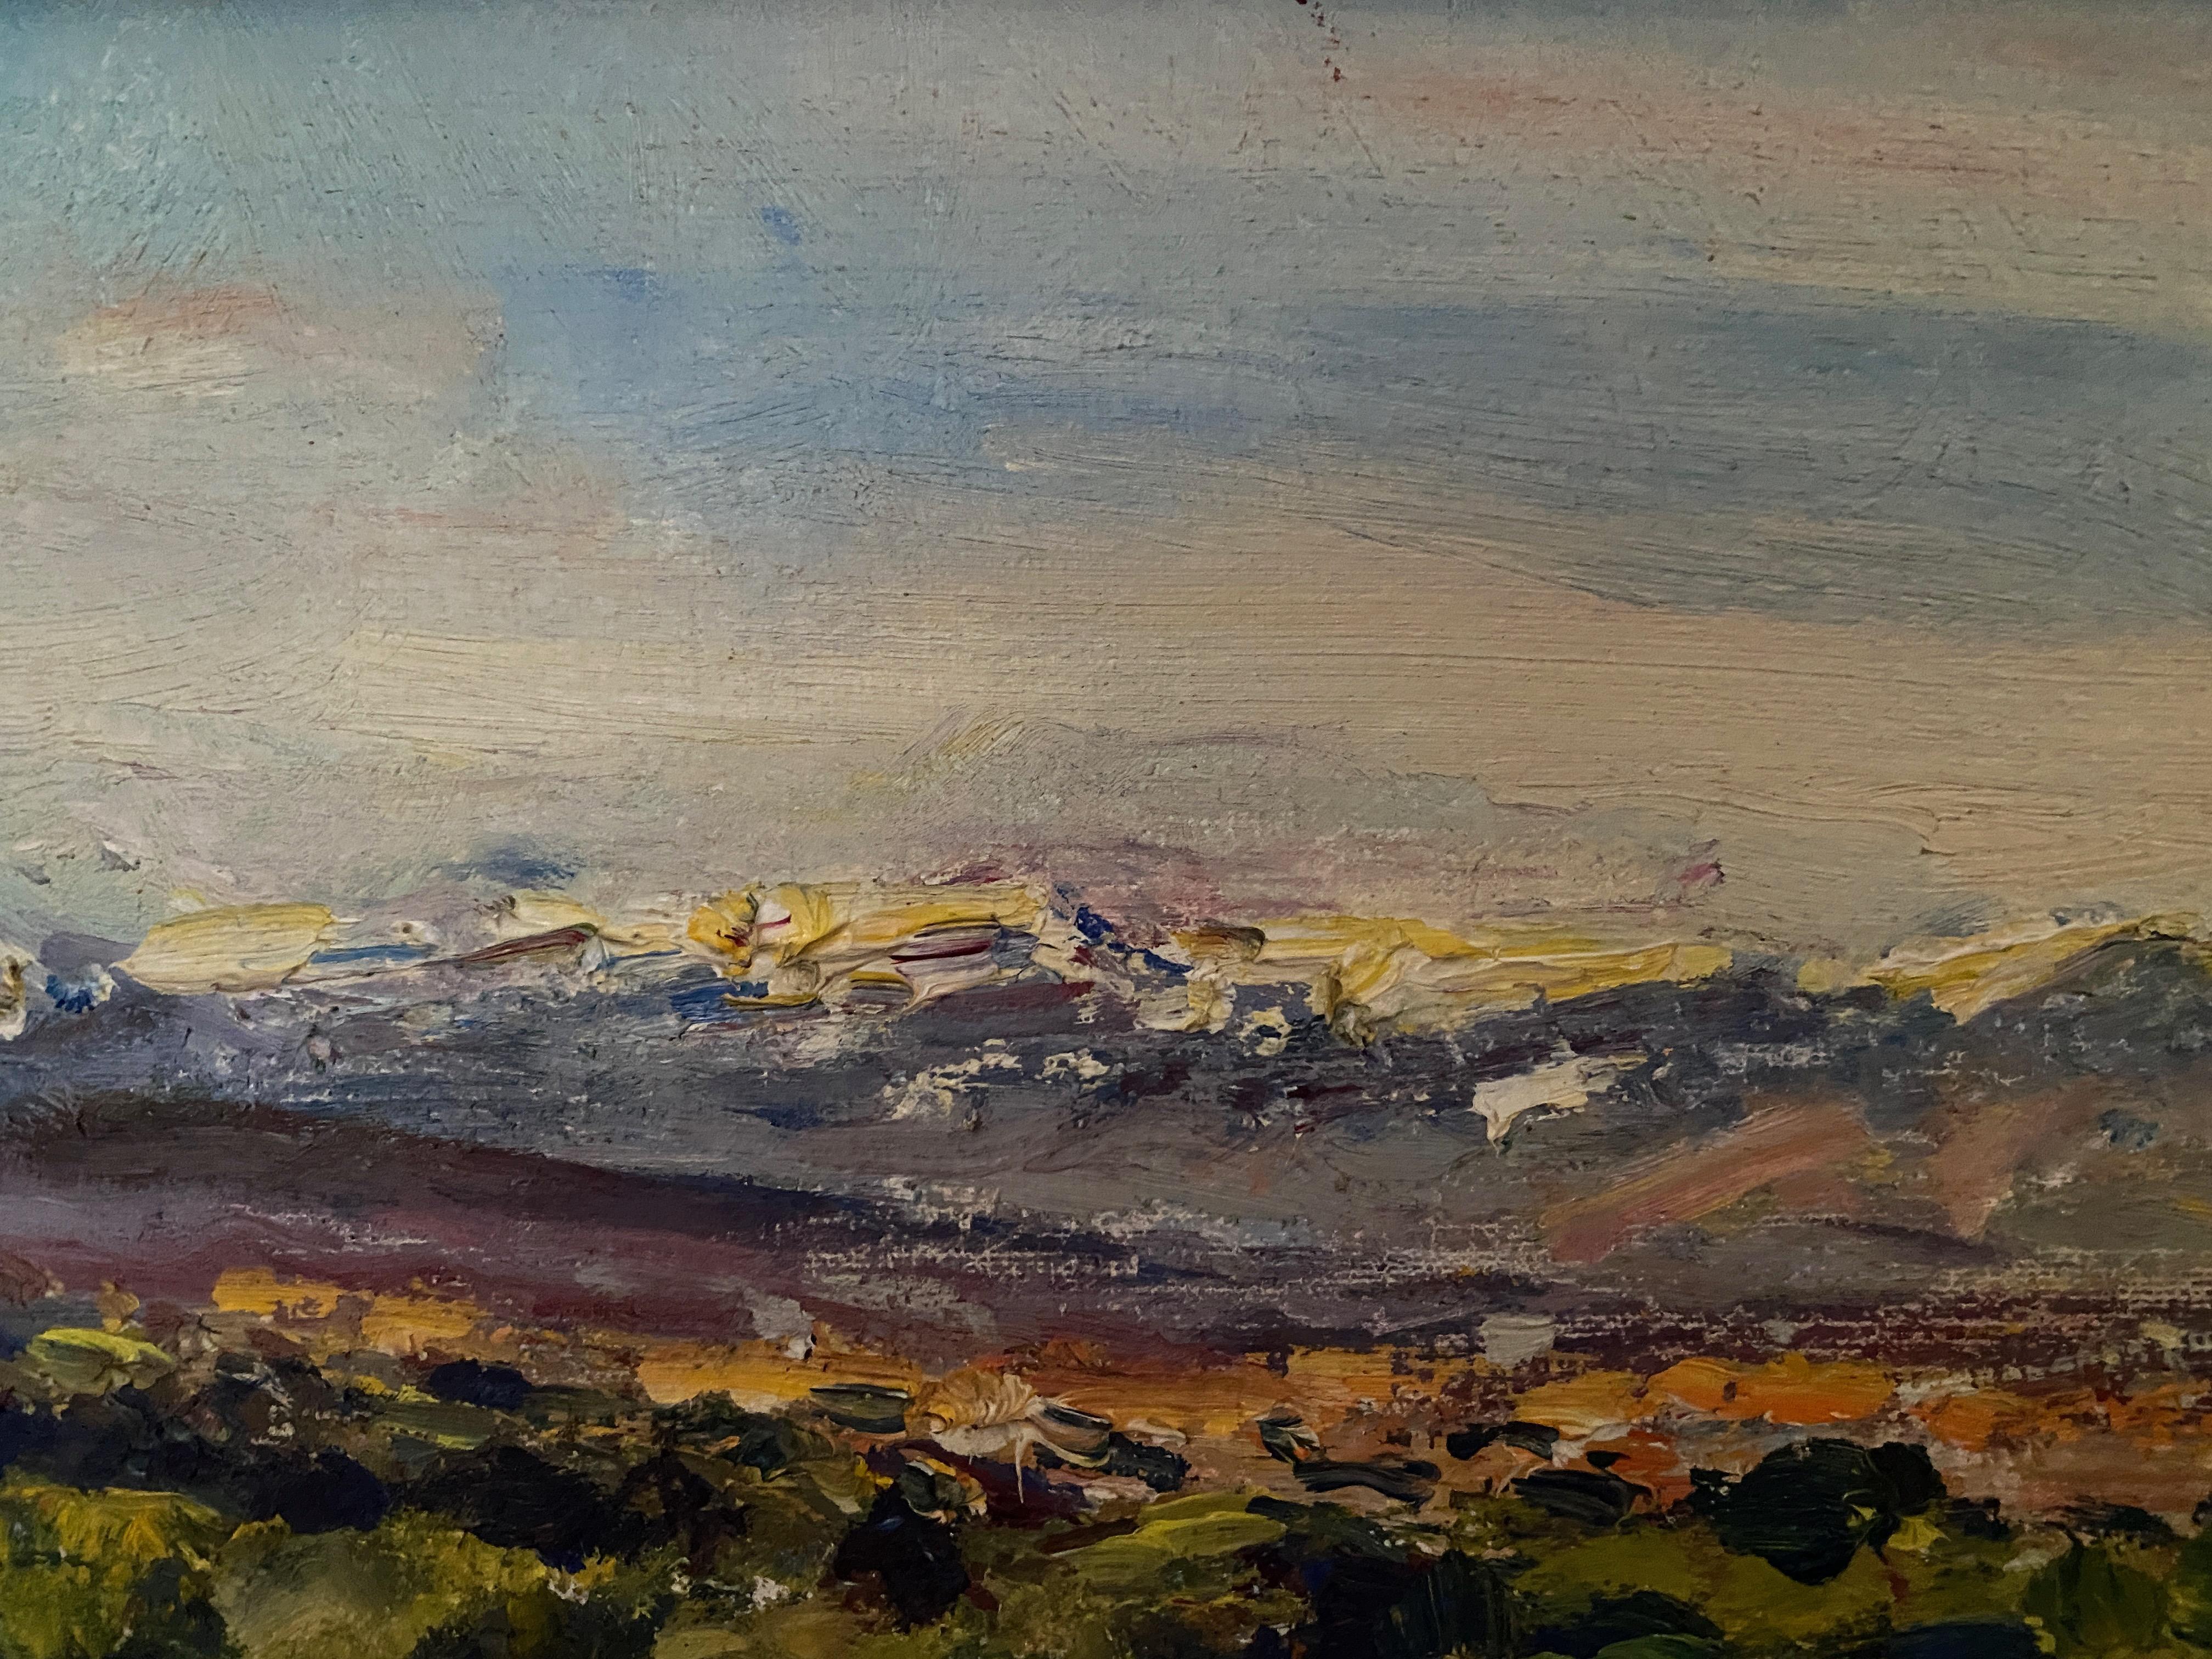 Landscape.
Oil on panel, 23 x 31 cm. Framed 46 x 54 x 6 cm. ( In inches: 9 x 12.2 In / framed 18.11 x 21.26 x 2.36 )
Signed down right angle.

Author Simó Busom (Barcelona- Spain 1927-2020), a landscape painter, trained at the Baixas Academy. He